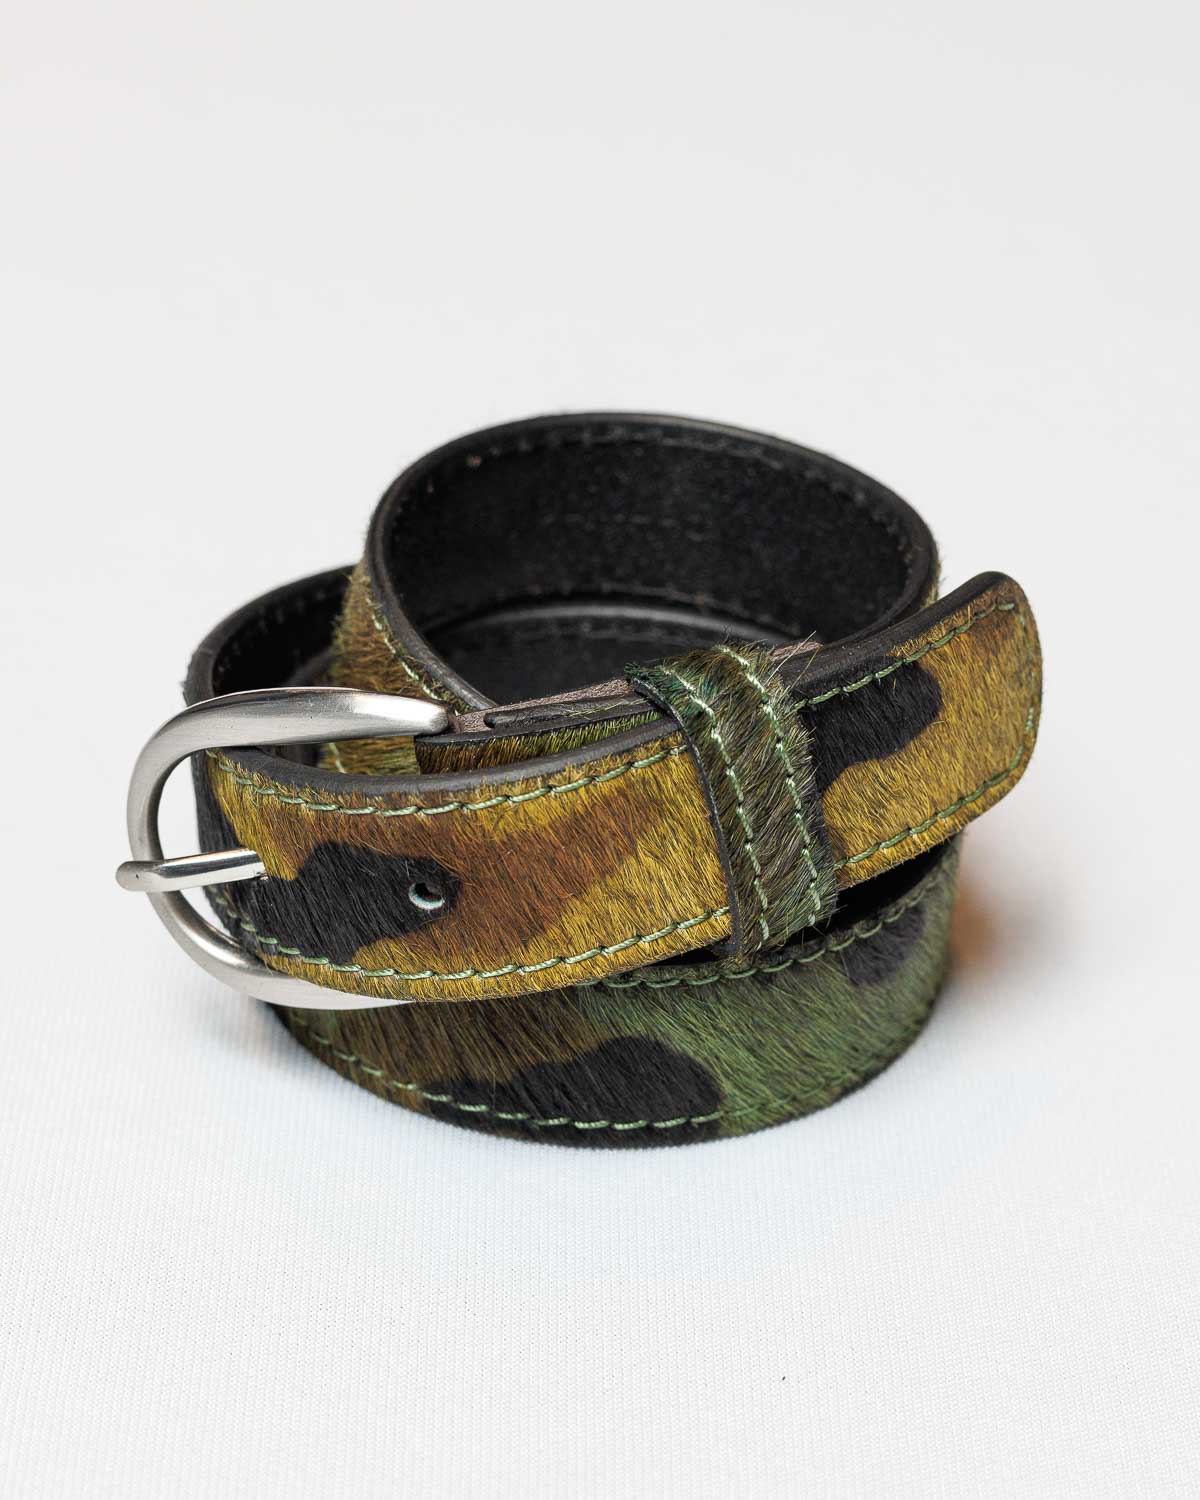 Hydestyle London Hide Leather Belt in Camouflage